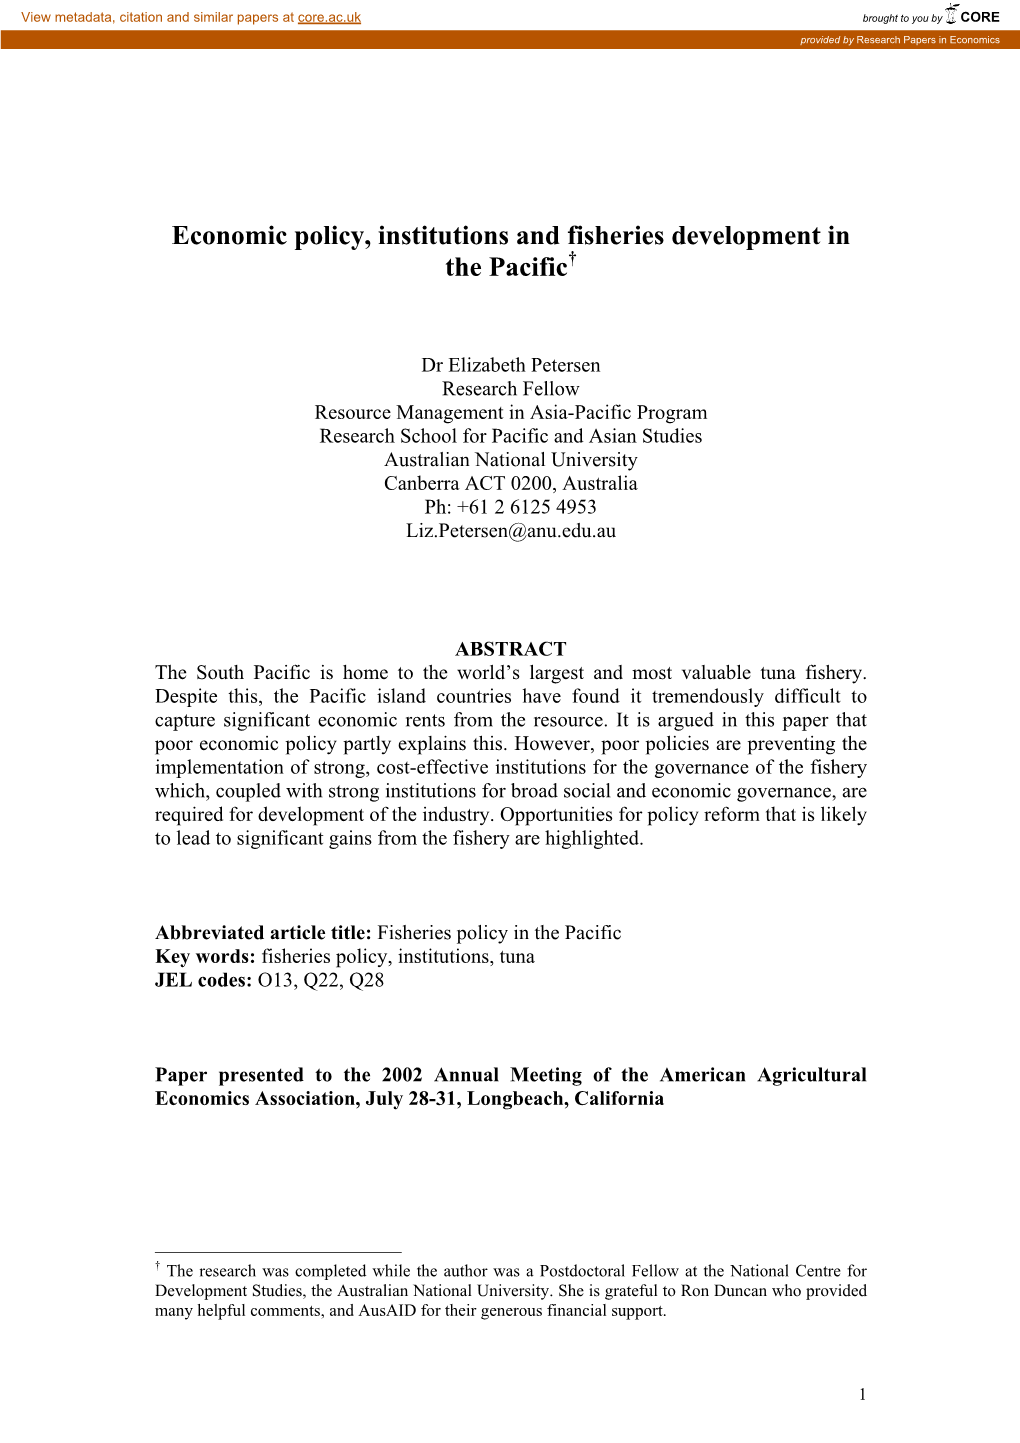 Causes of Poor Public Policy in Fishery Resource Development